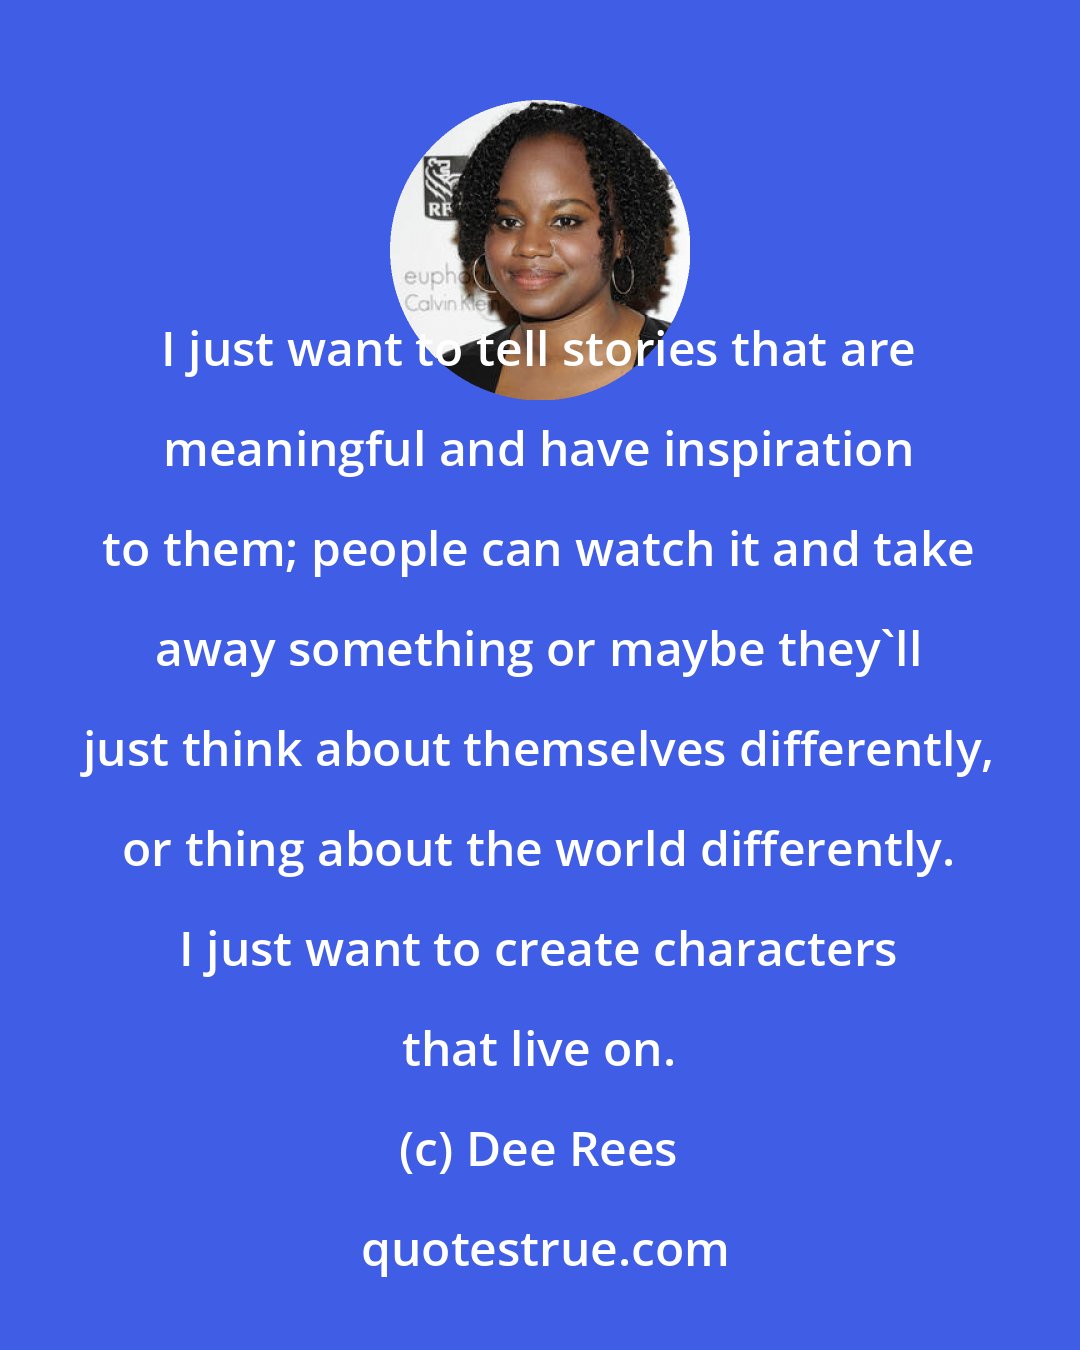 Dee Rees: I just want to tell stories that are meaningful and have inspiration to them; people can watch it and take away something or maybe they'll just think about themselves differently, or thing about the world differently. I just want to create characters that live on.